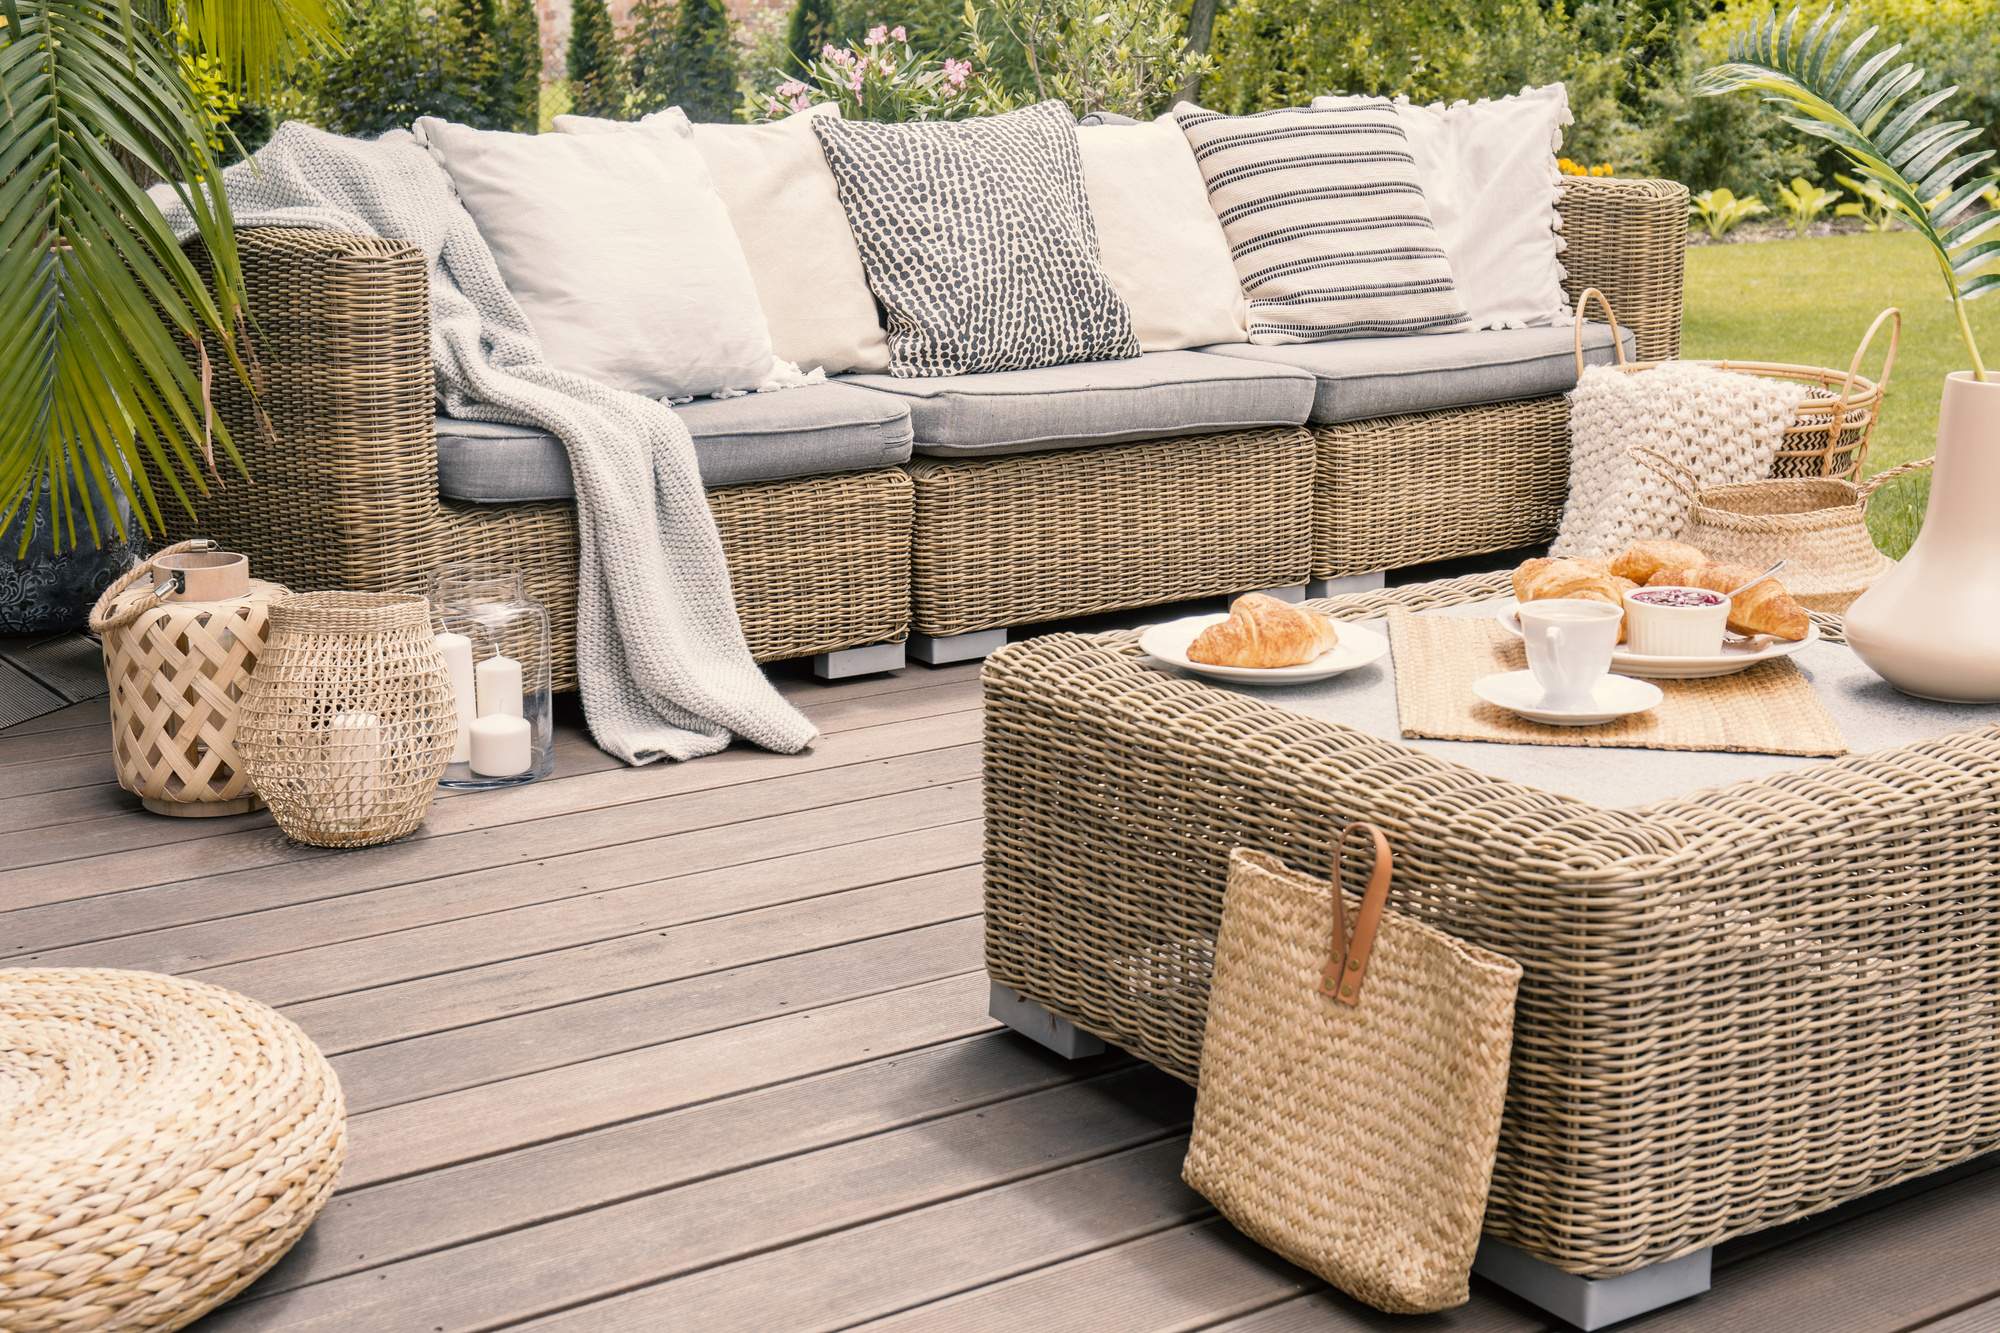 Outdoor Furniture Ideas: 3 Tips for Choosing the Right Style for You